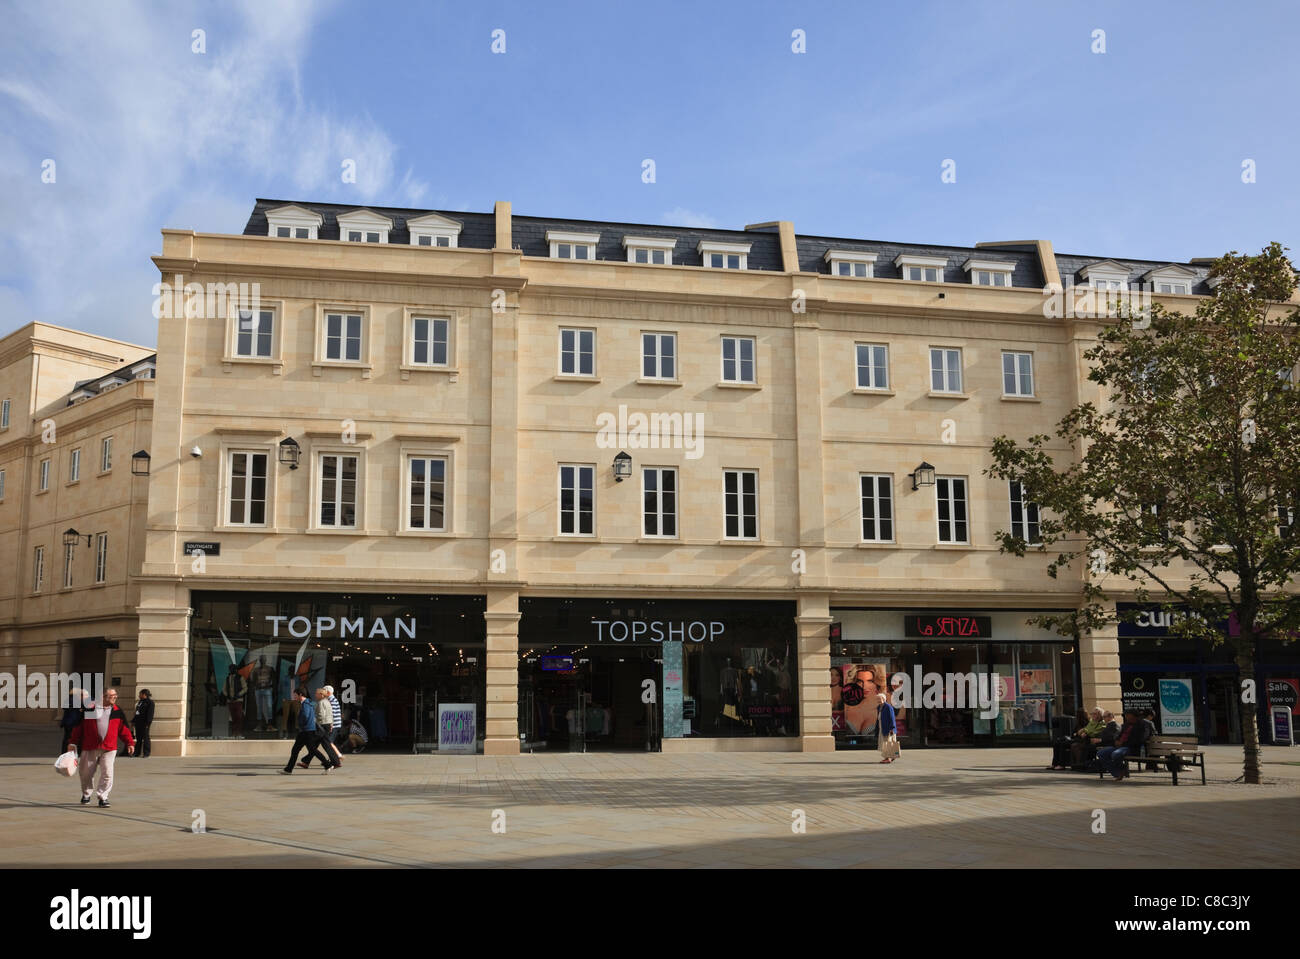 Southgate Place, Bath, Somerset, England, UK. Topman and Topshop stores with shoppers in new pedestrianised shopping centre Stock Photo